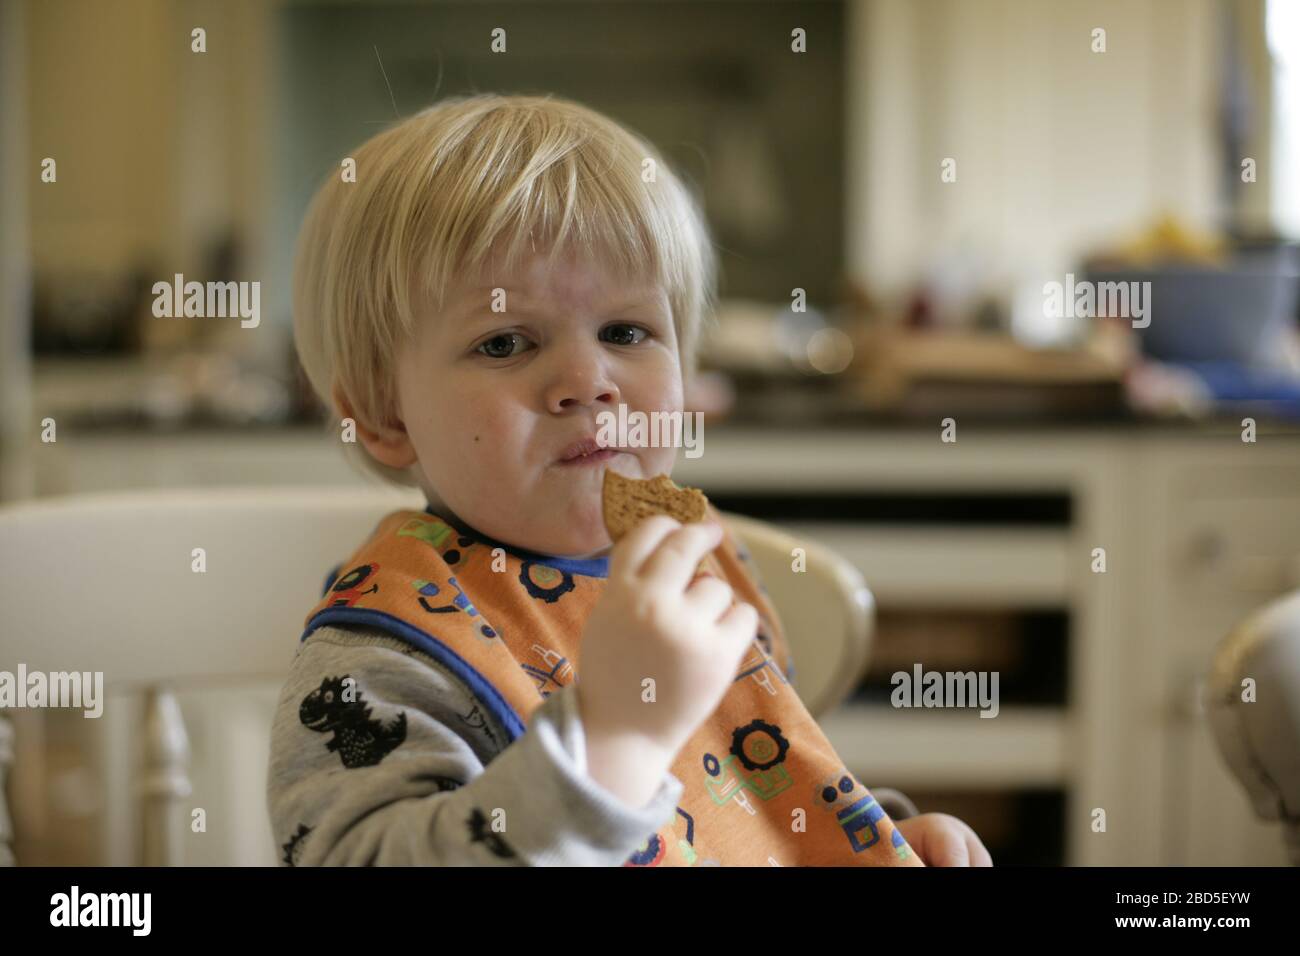 Child toddler eating home-baked biscuits whilst mum works in kitchen during period of self-isolation during the 2020 COVID-19 coronavirus pandemic Stock Photo